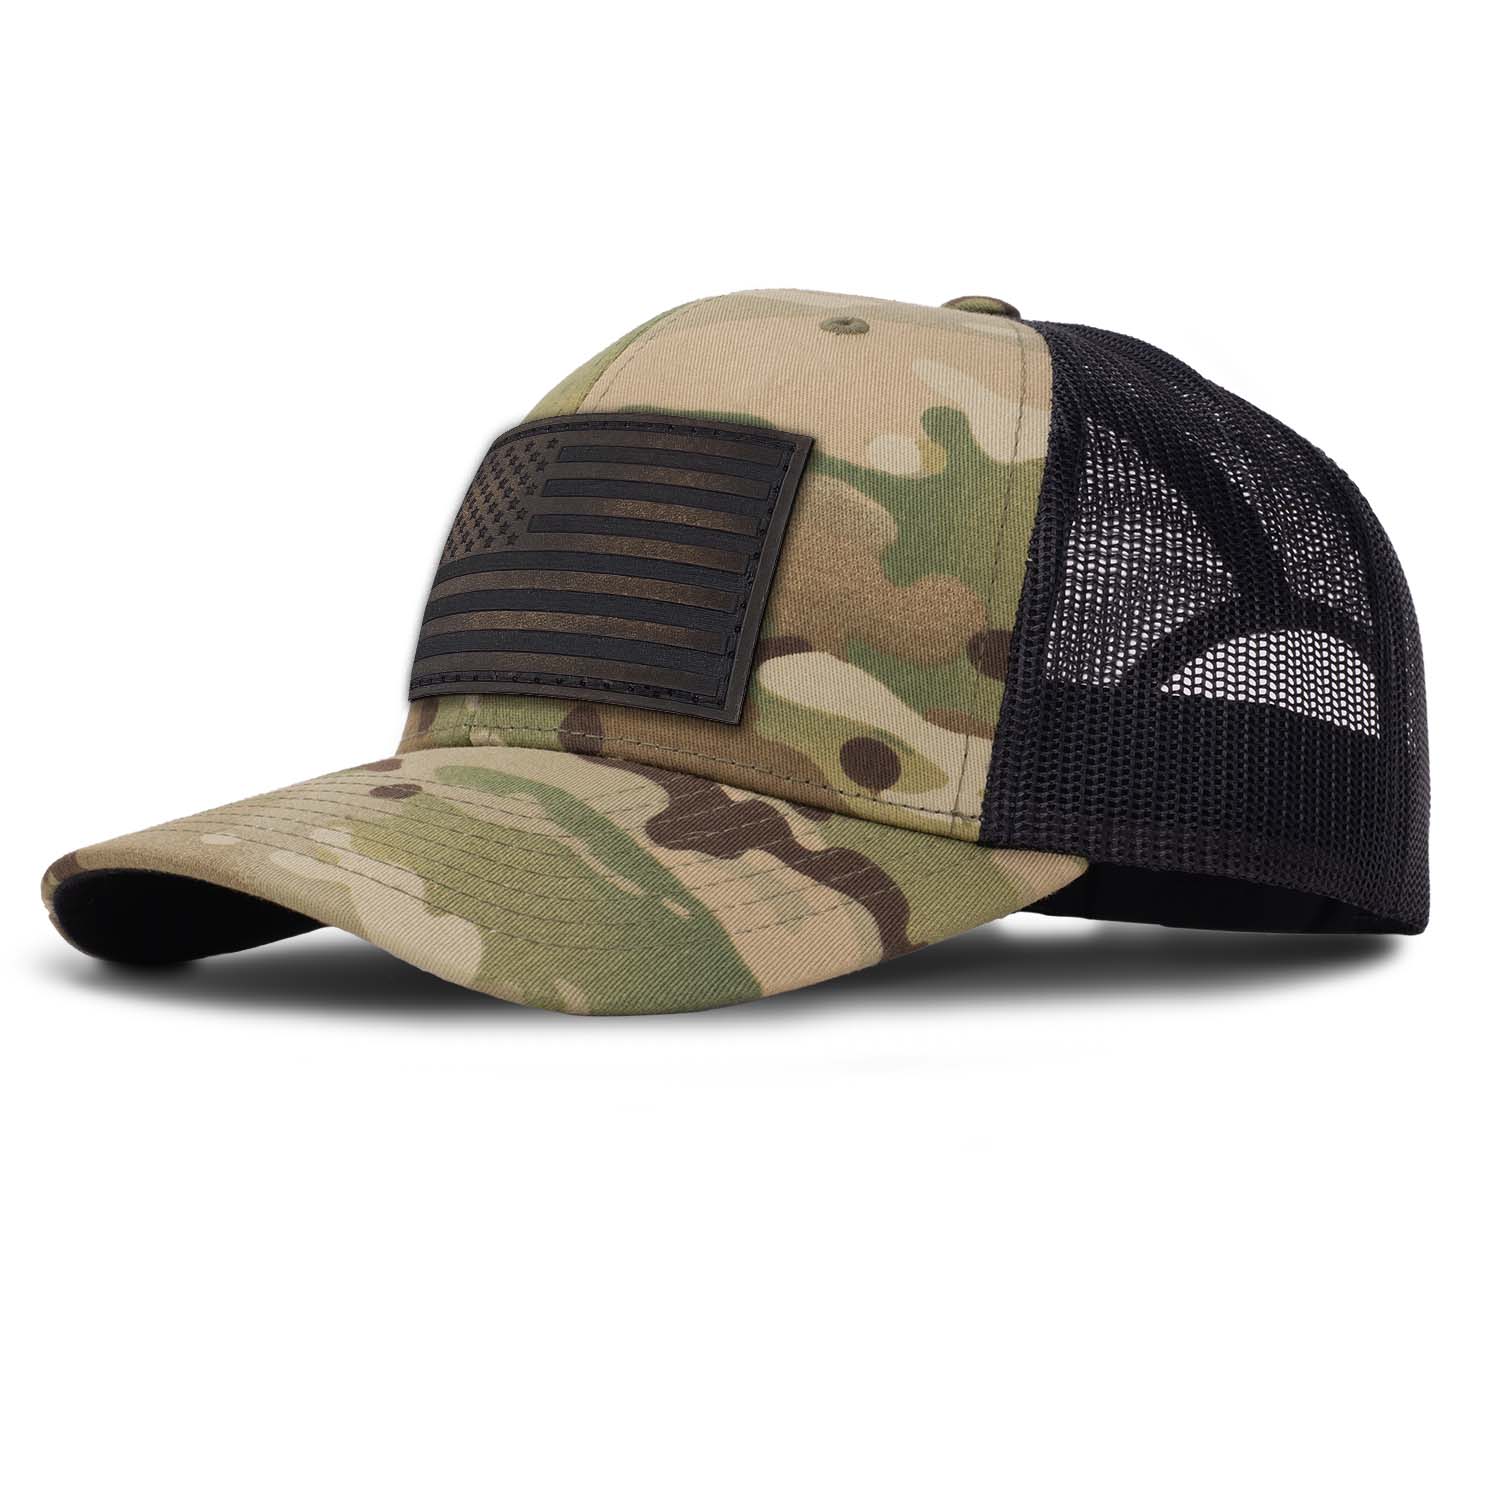 Revolution Mfg classic trucker hat in multicam camo with black mesh with a dark brown full grain leather American flag patch